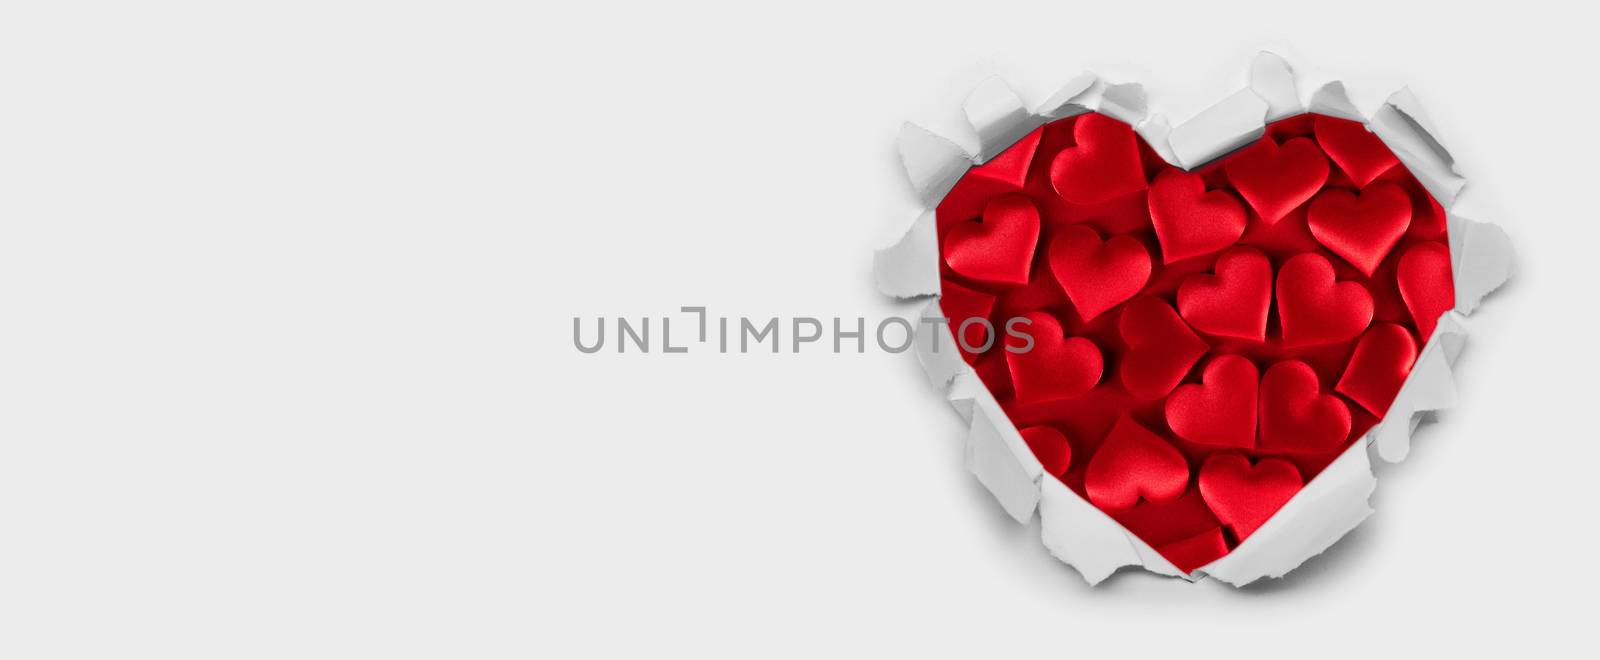 Torn white paper heart over red hearts background with copy space for text, Valentine's day love concept